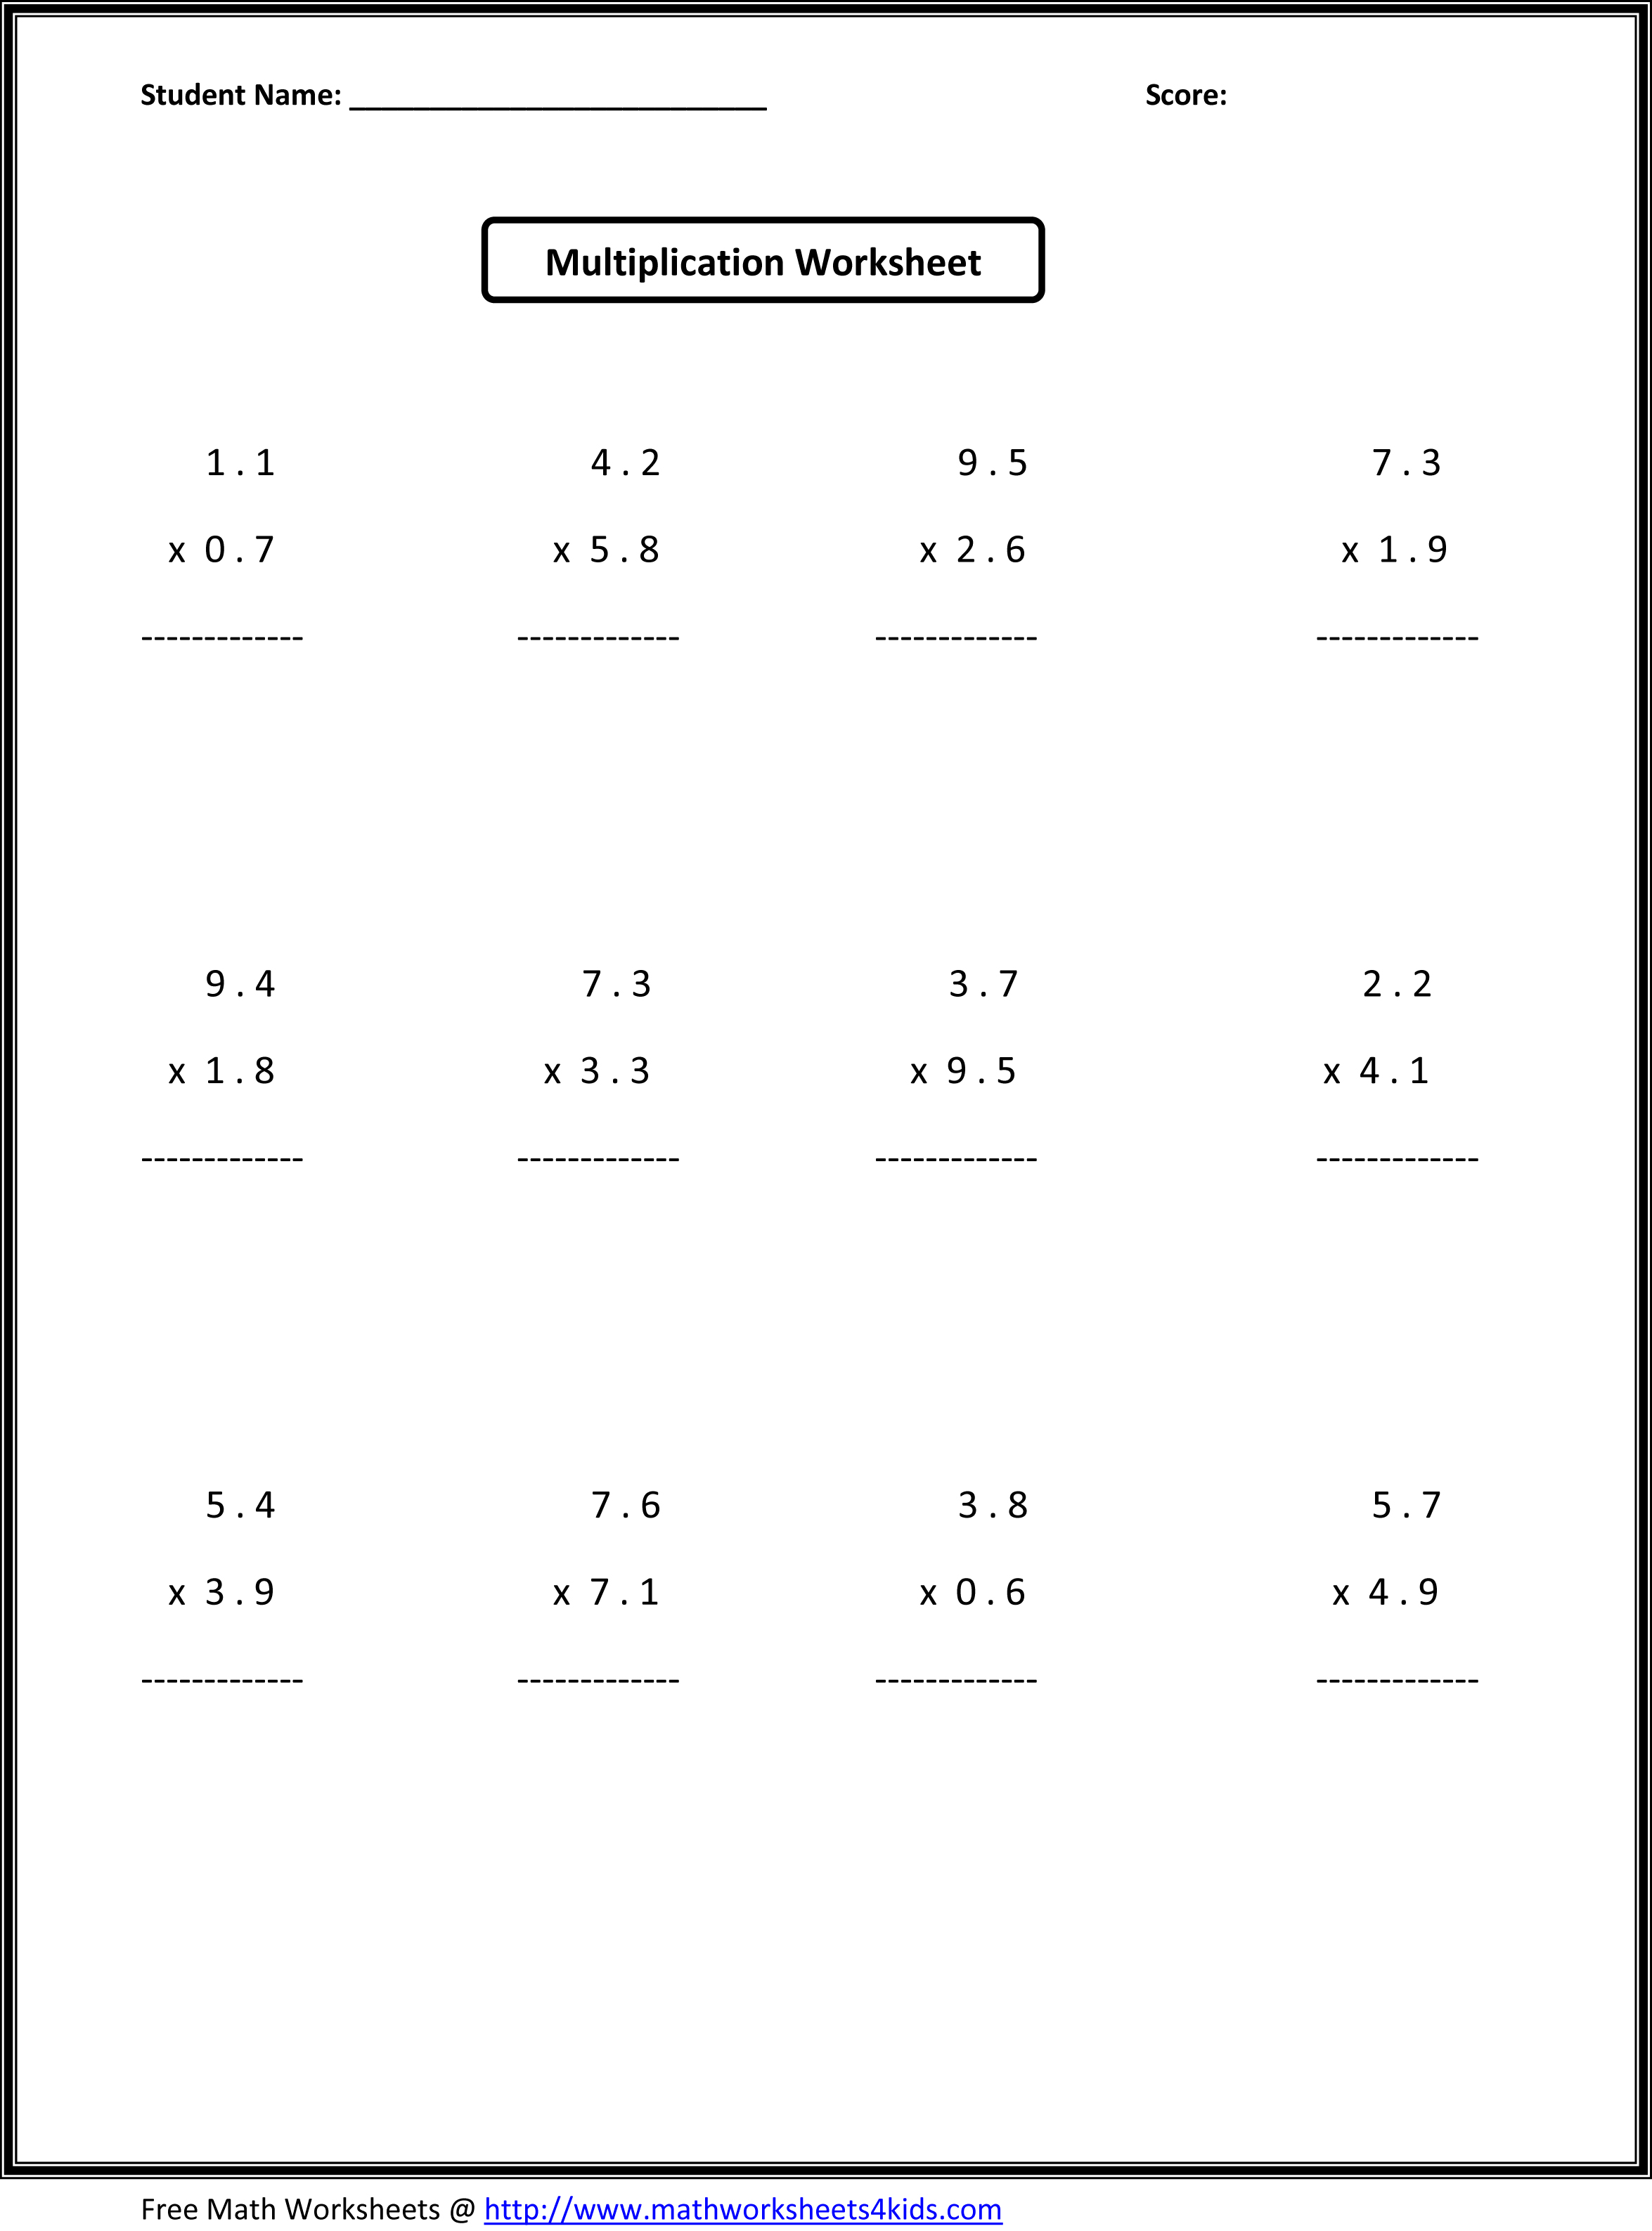 free-printable-math-worksheets-for-6th-grade